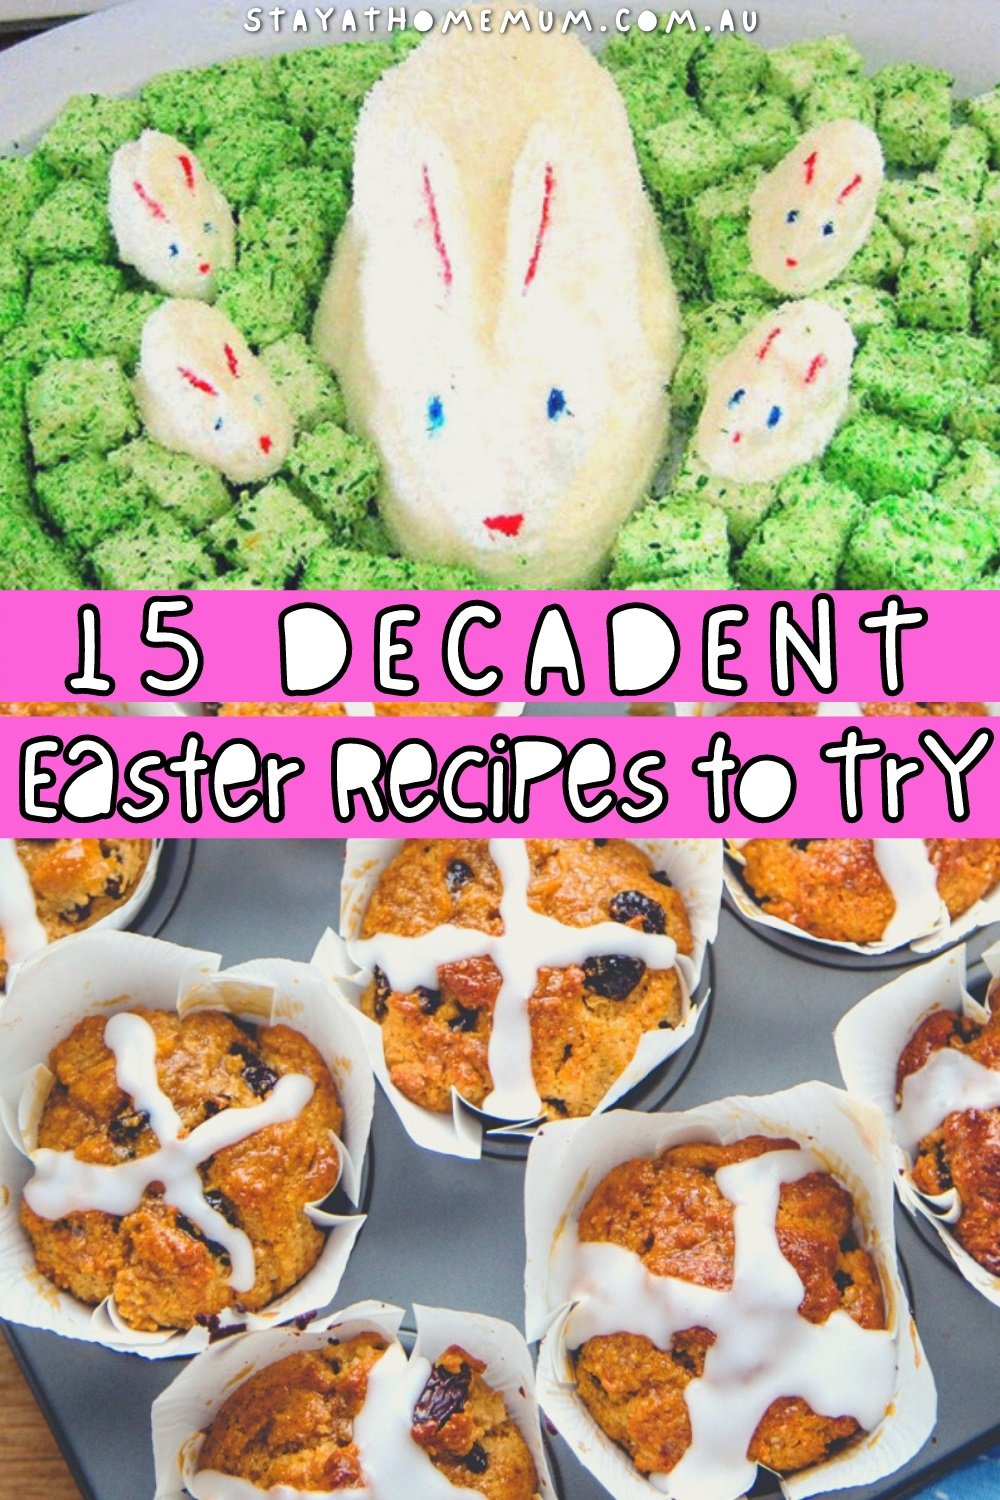 15 Decadent Easter Recipes to Try | Stay At Home Mum